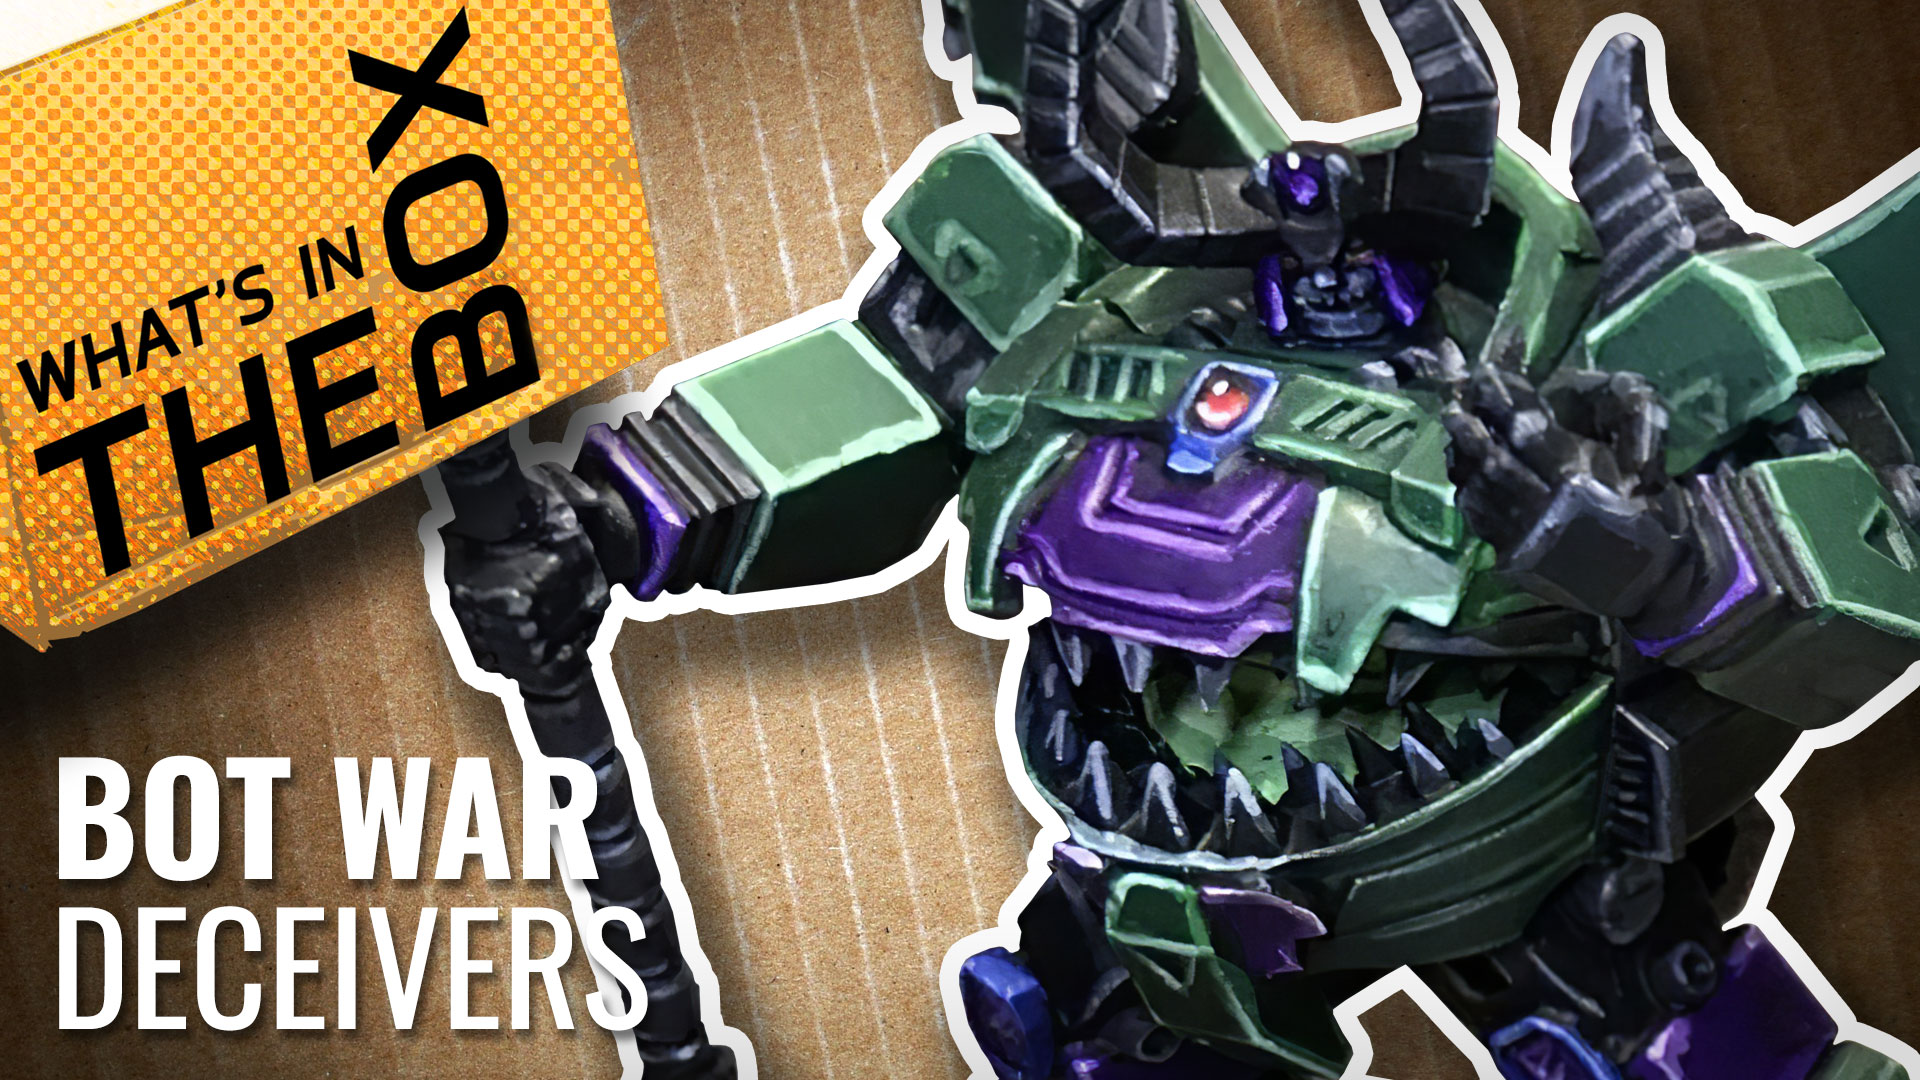 Unboxing---Traders-Galaxy_Bot-War-Deceivers-coverimage